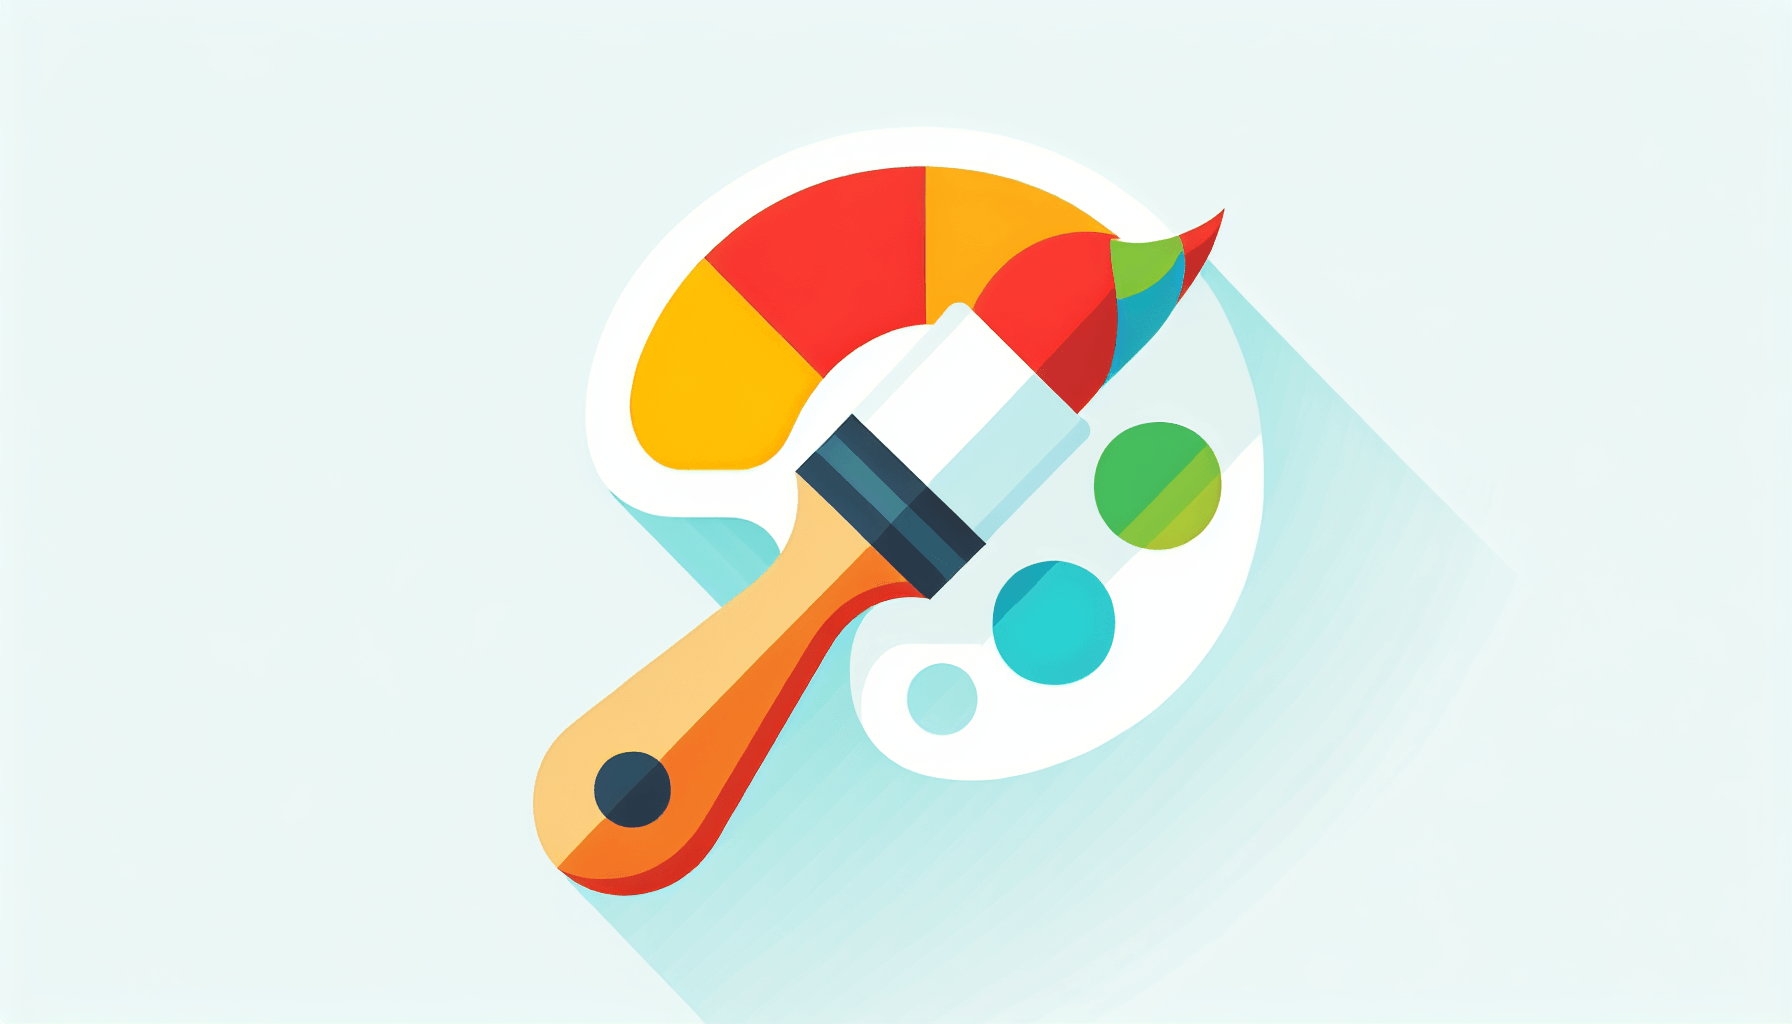 Paintbrush in flat illustration style and white background, red #f47574, green #88c7a8, yellow #fcc44b, and blue #645bc8 colors.